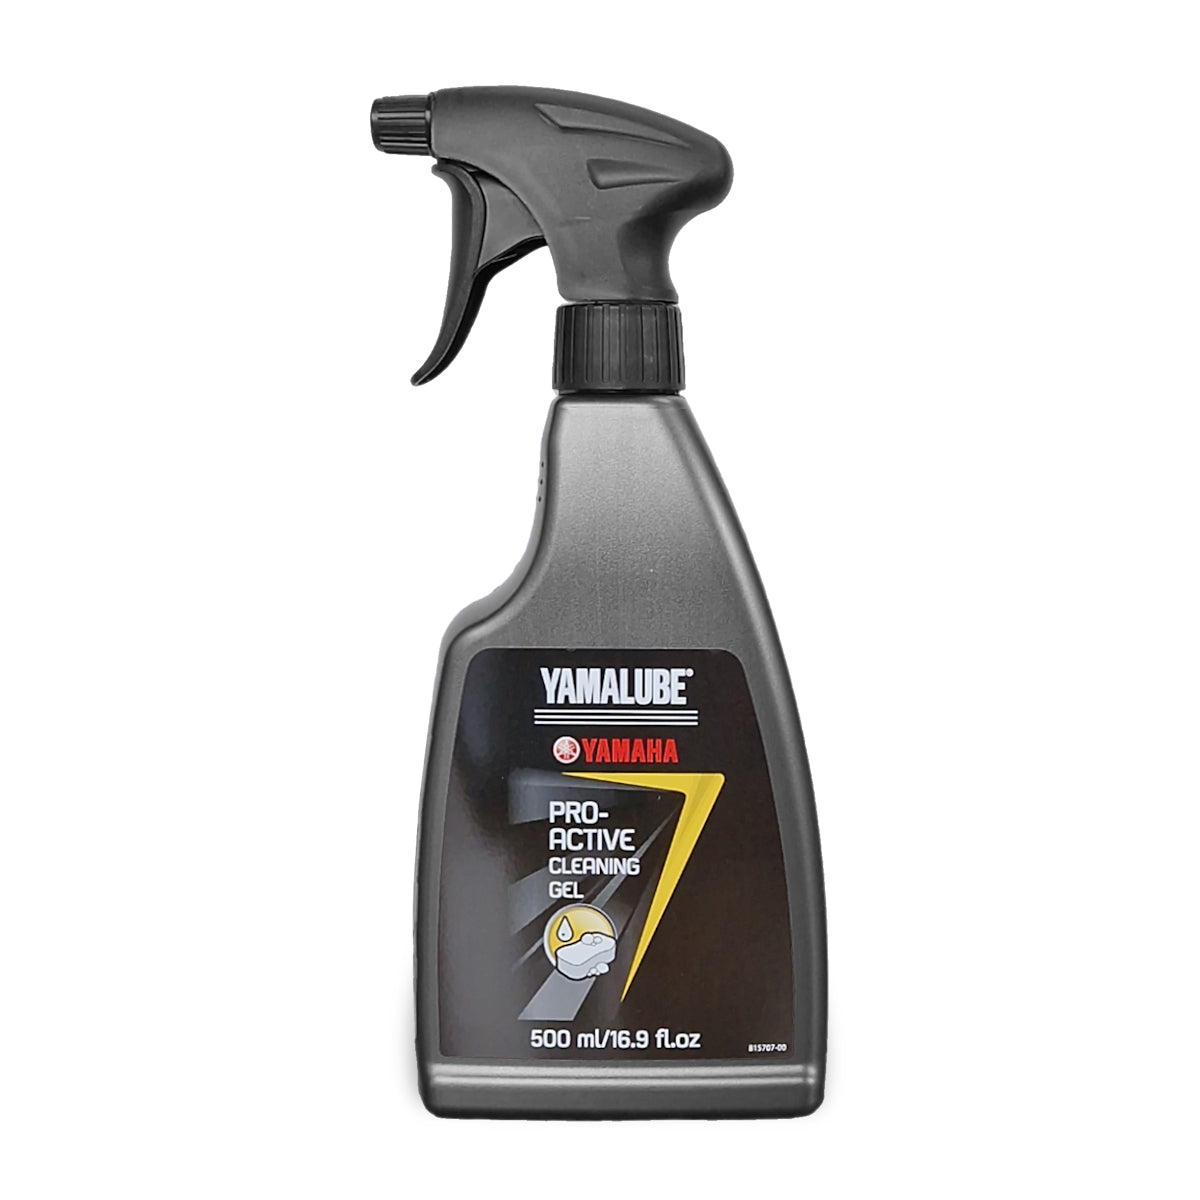 Yamalube Pro-Active Cleaning Gel - 500ml